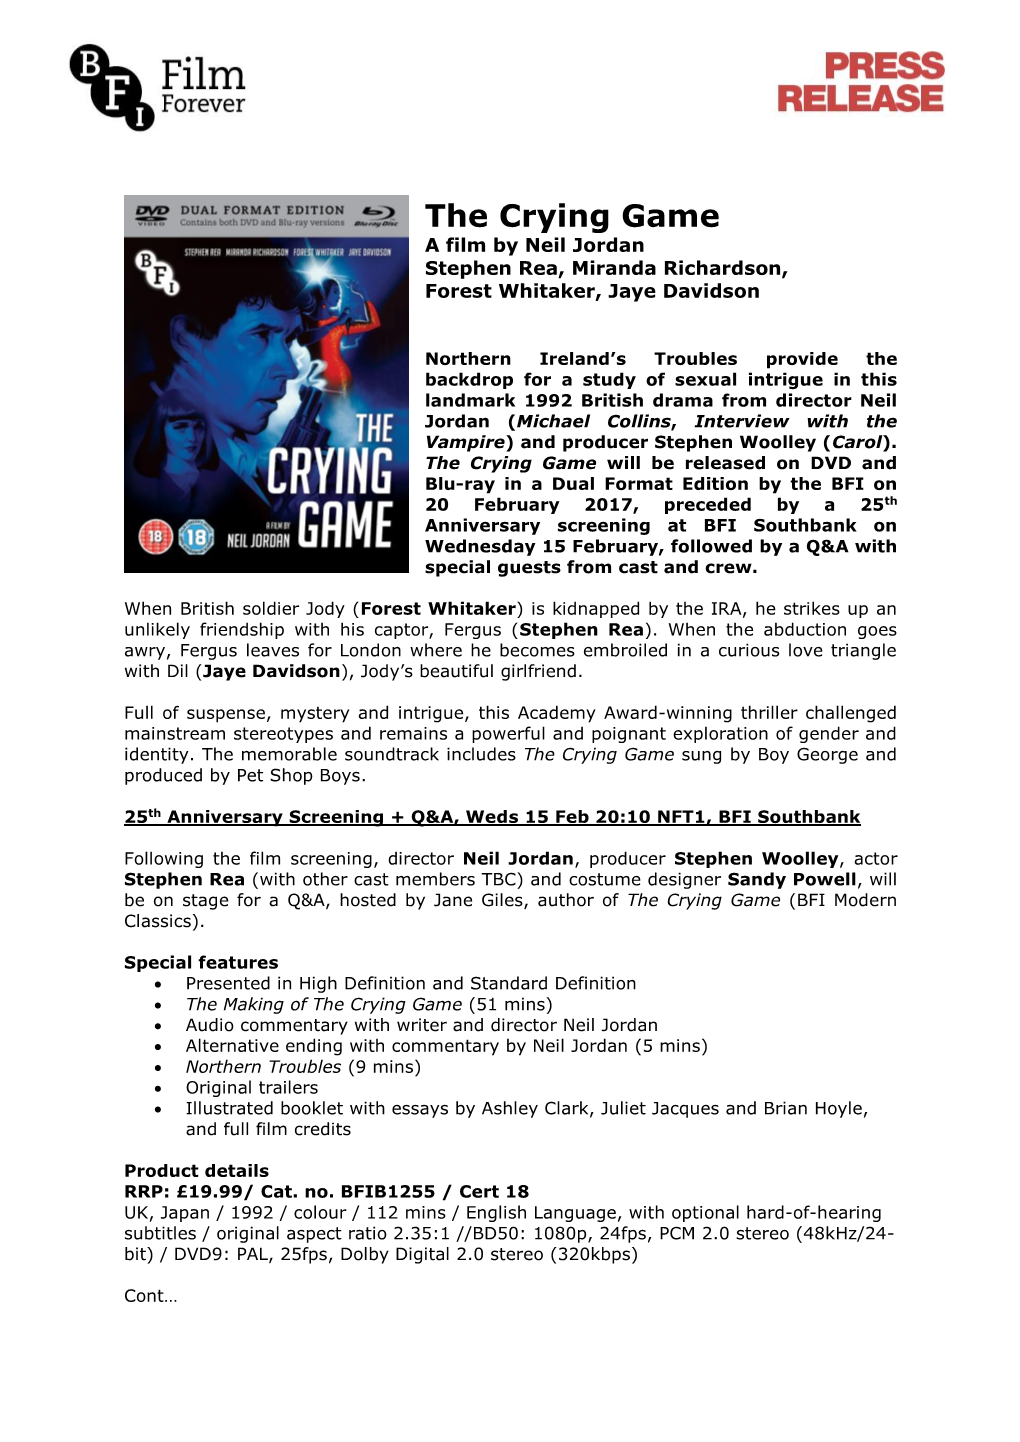 BFI Press Release: the Crying Game (Dual-Format Edition Blu-Ray/DVD)